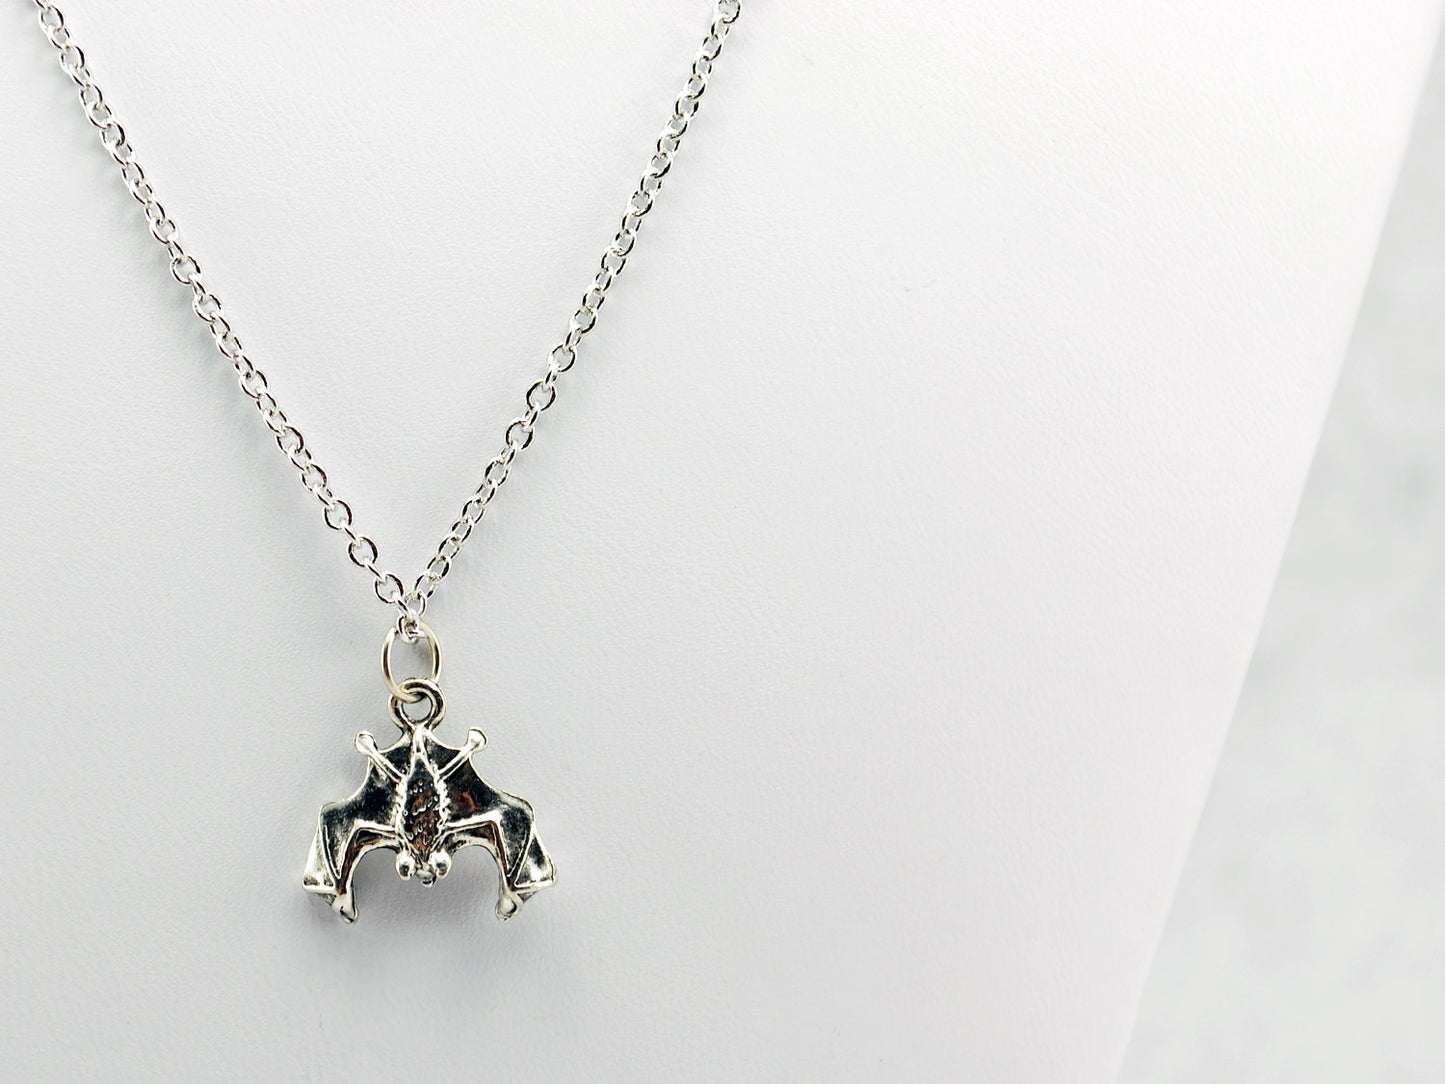 Bat Necklace in Silver